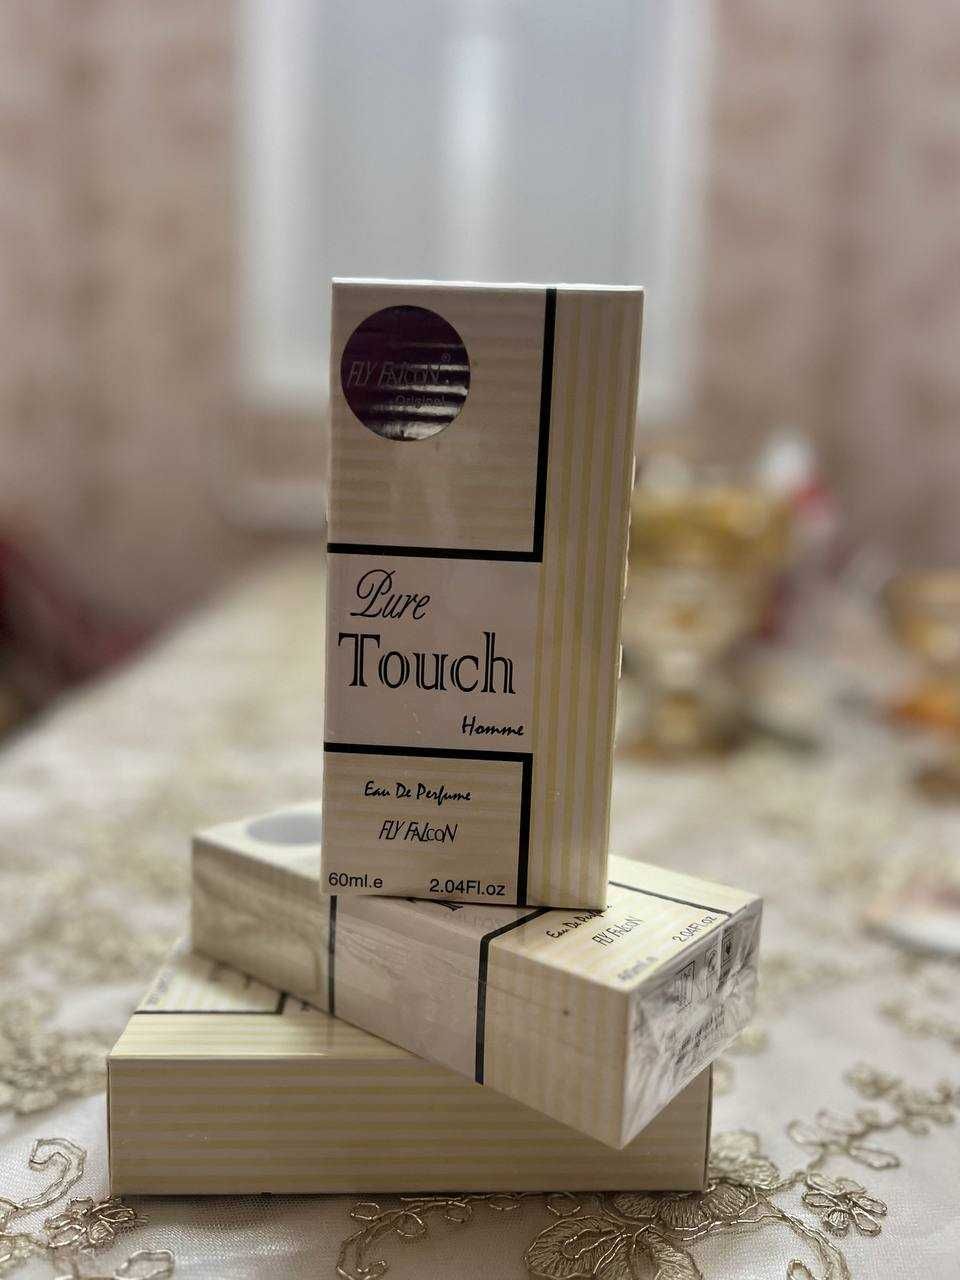 Pure Touch homme